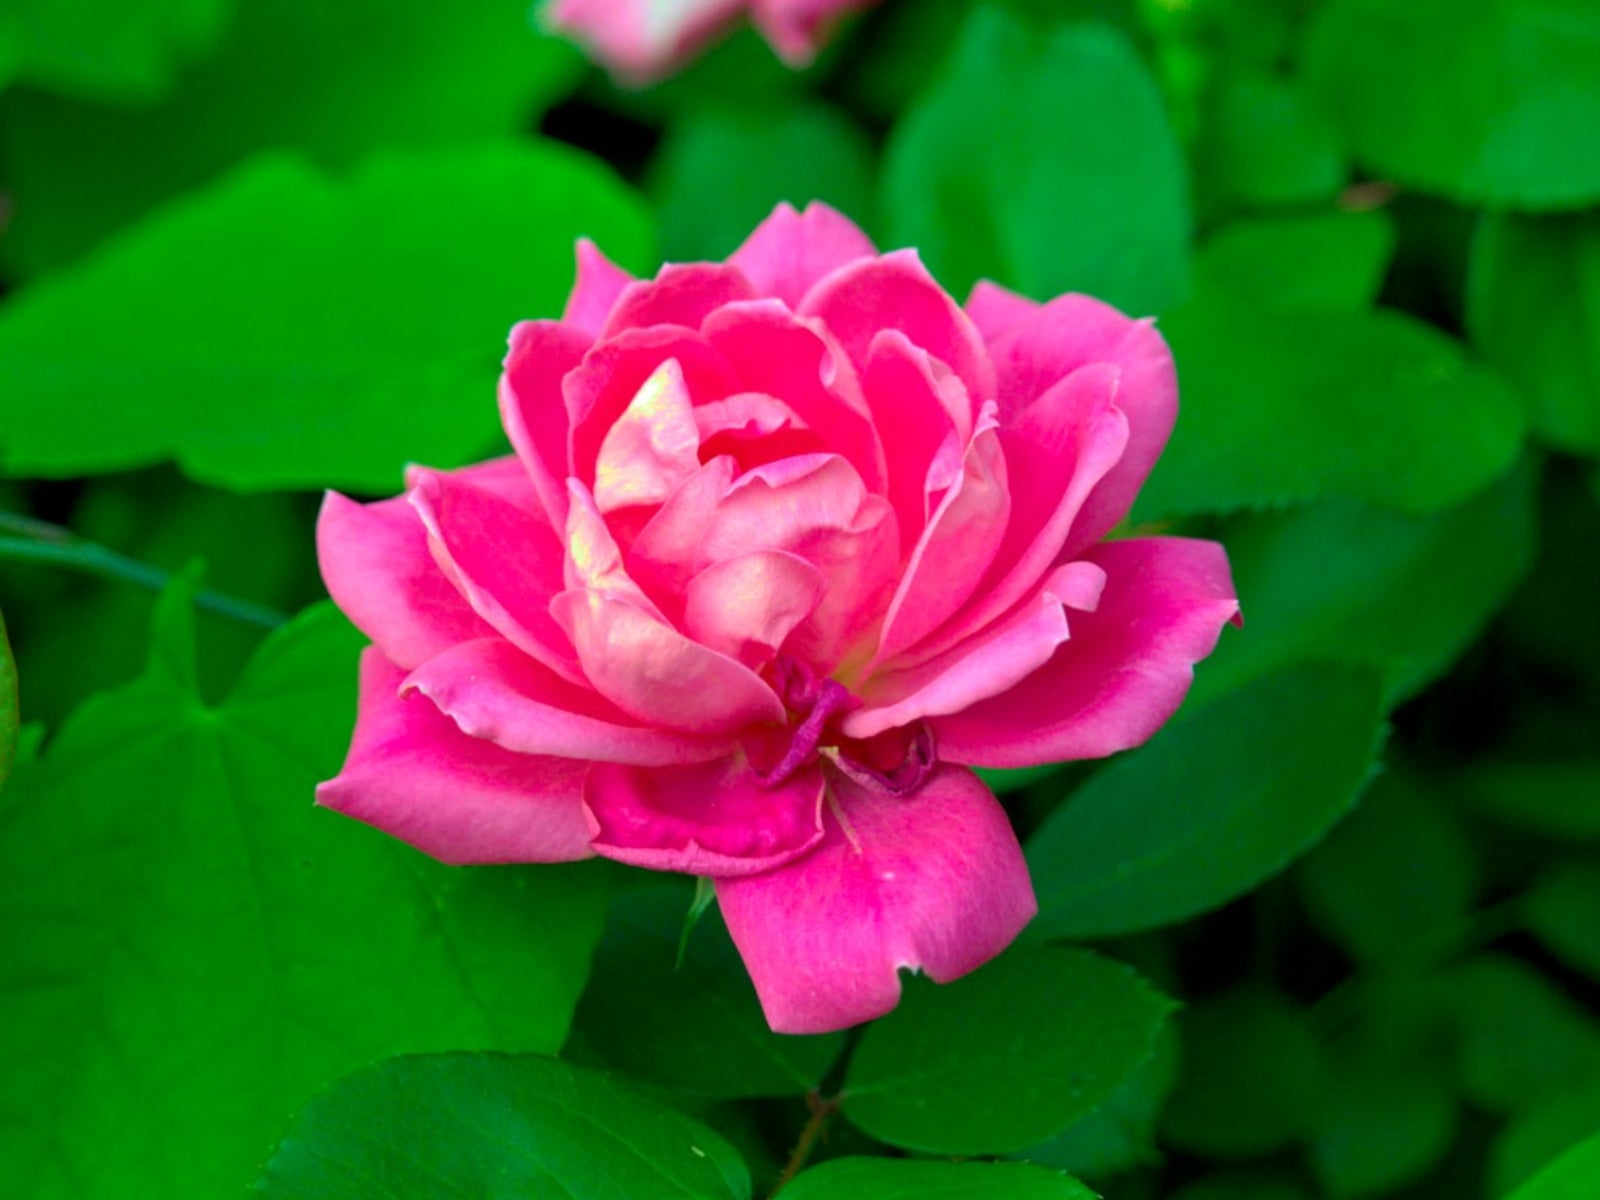 Indoor/Outdoor Flowering Plant Brighter Blooms No Shipping to AZ 2-3 Feet Pink Knock Out Rose Tree